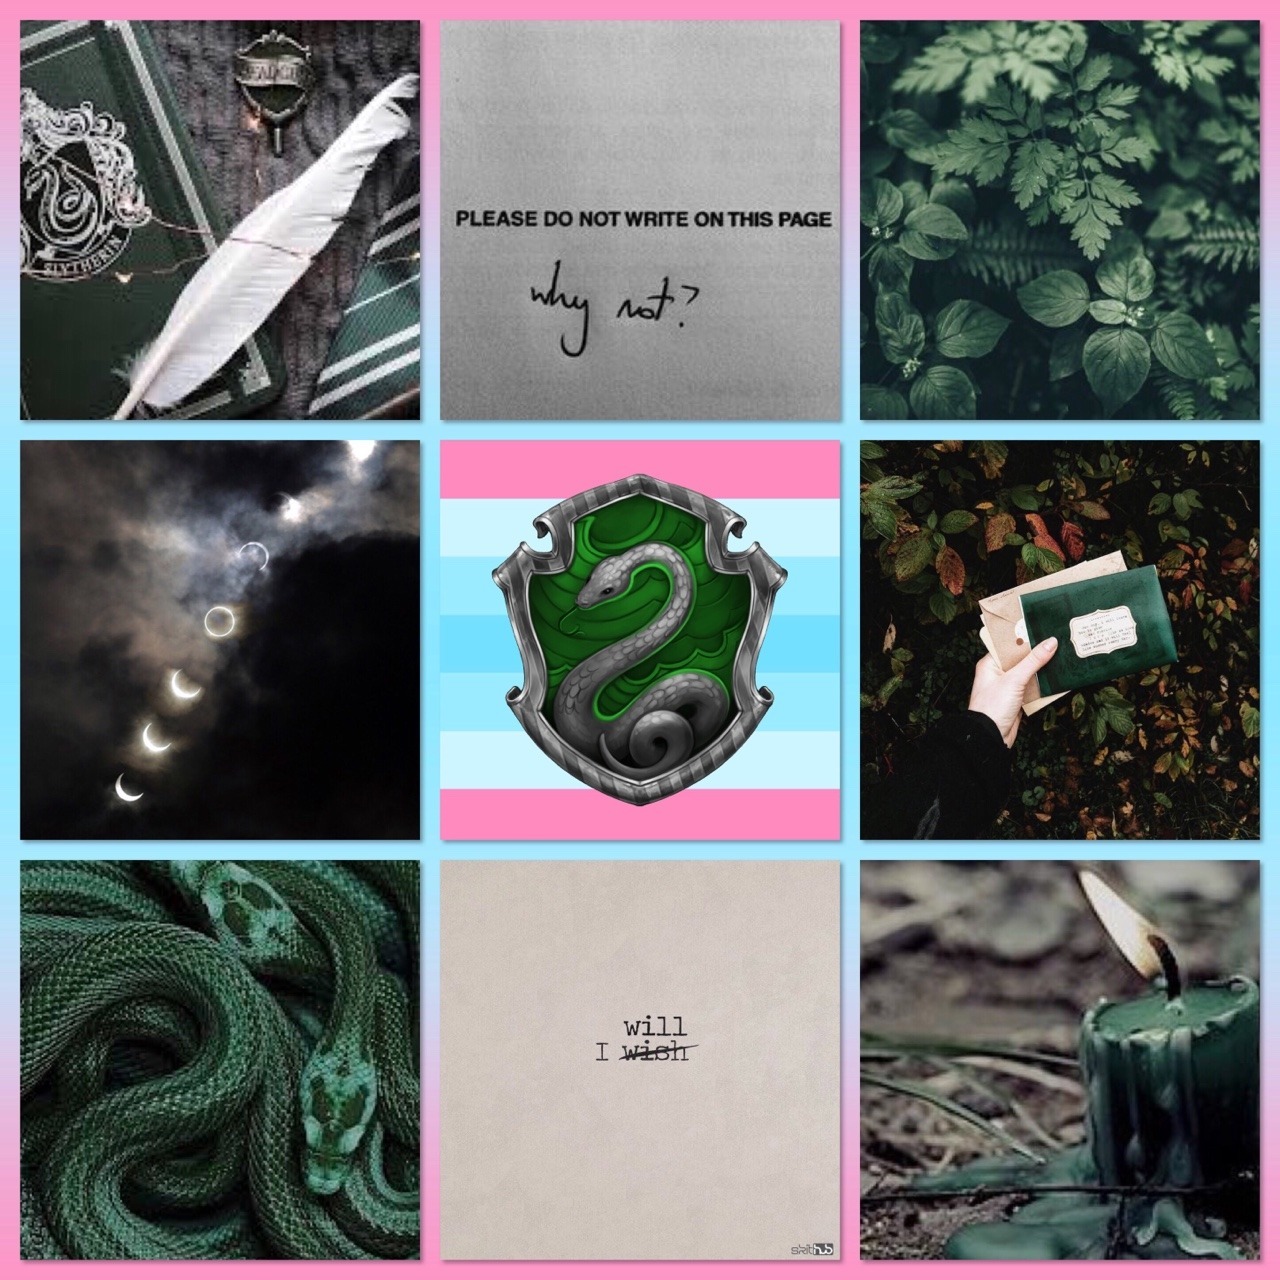 A collage of images including a green snake, a book, a feather, and a slytherin crest - Slytherin